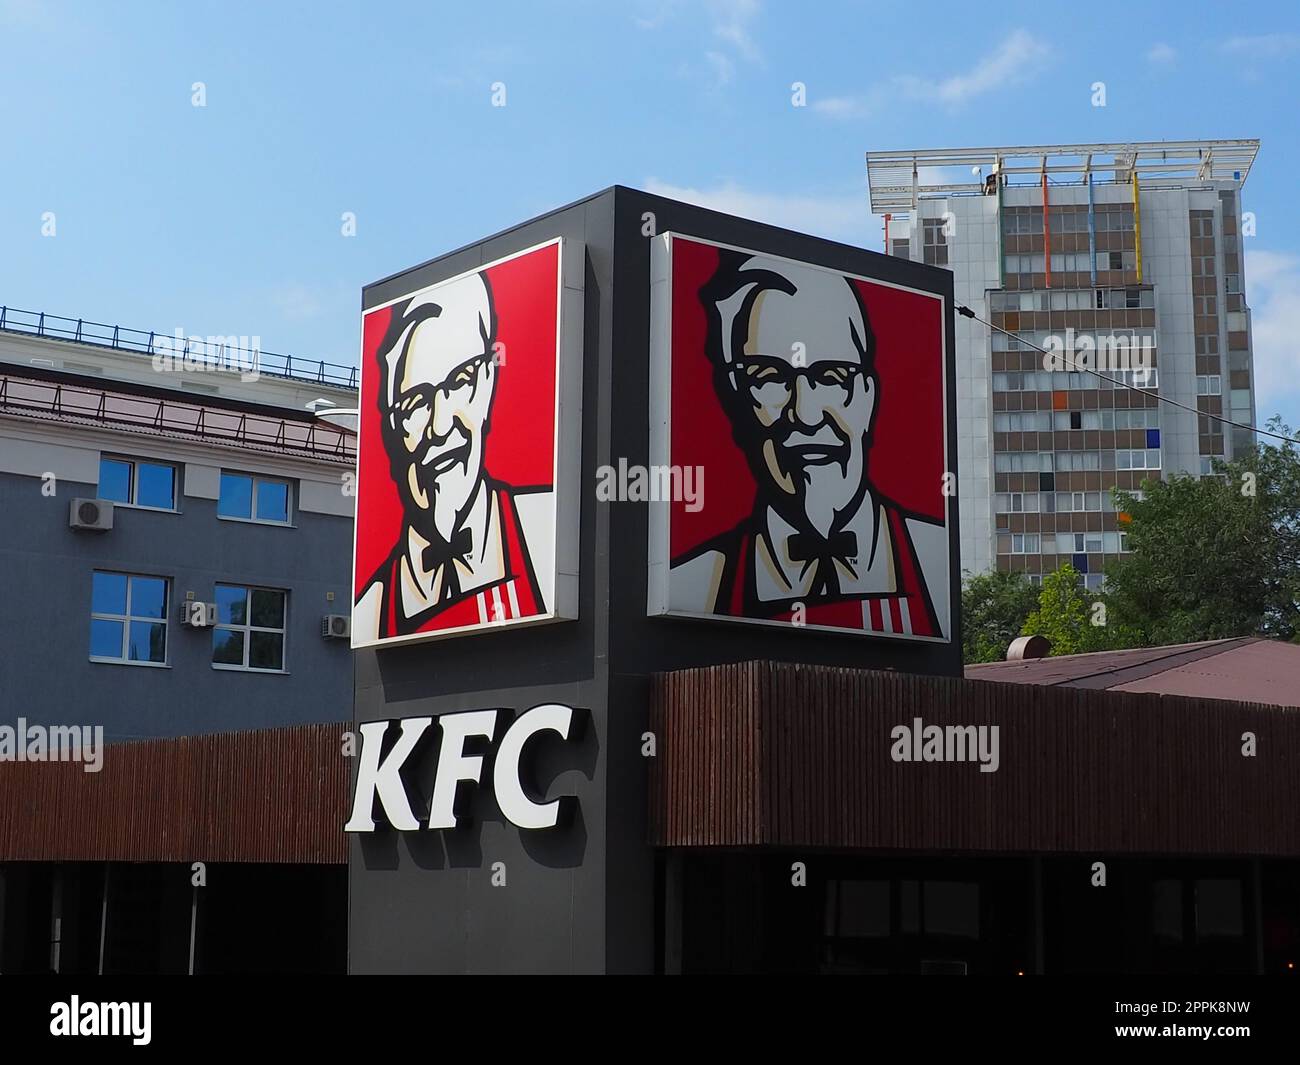 Anapa, Russia, August 23, 2021. KFC restaurant. Kentucky Fried Chicken, or KFC for short, is an international foodservice chain specializing in chicken dishes. Brand, logo or outdoor advertising Stock Photo